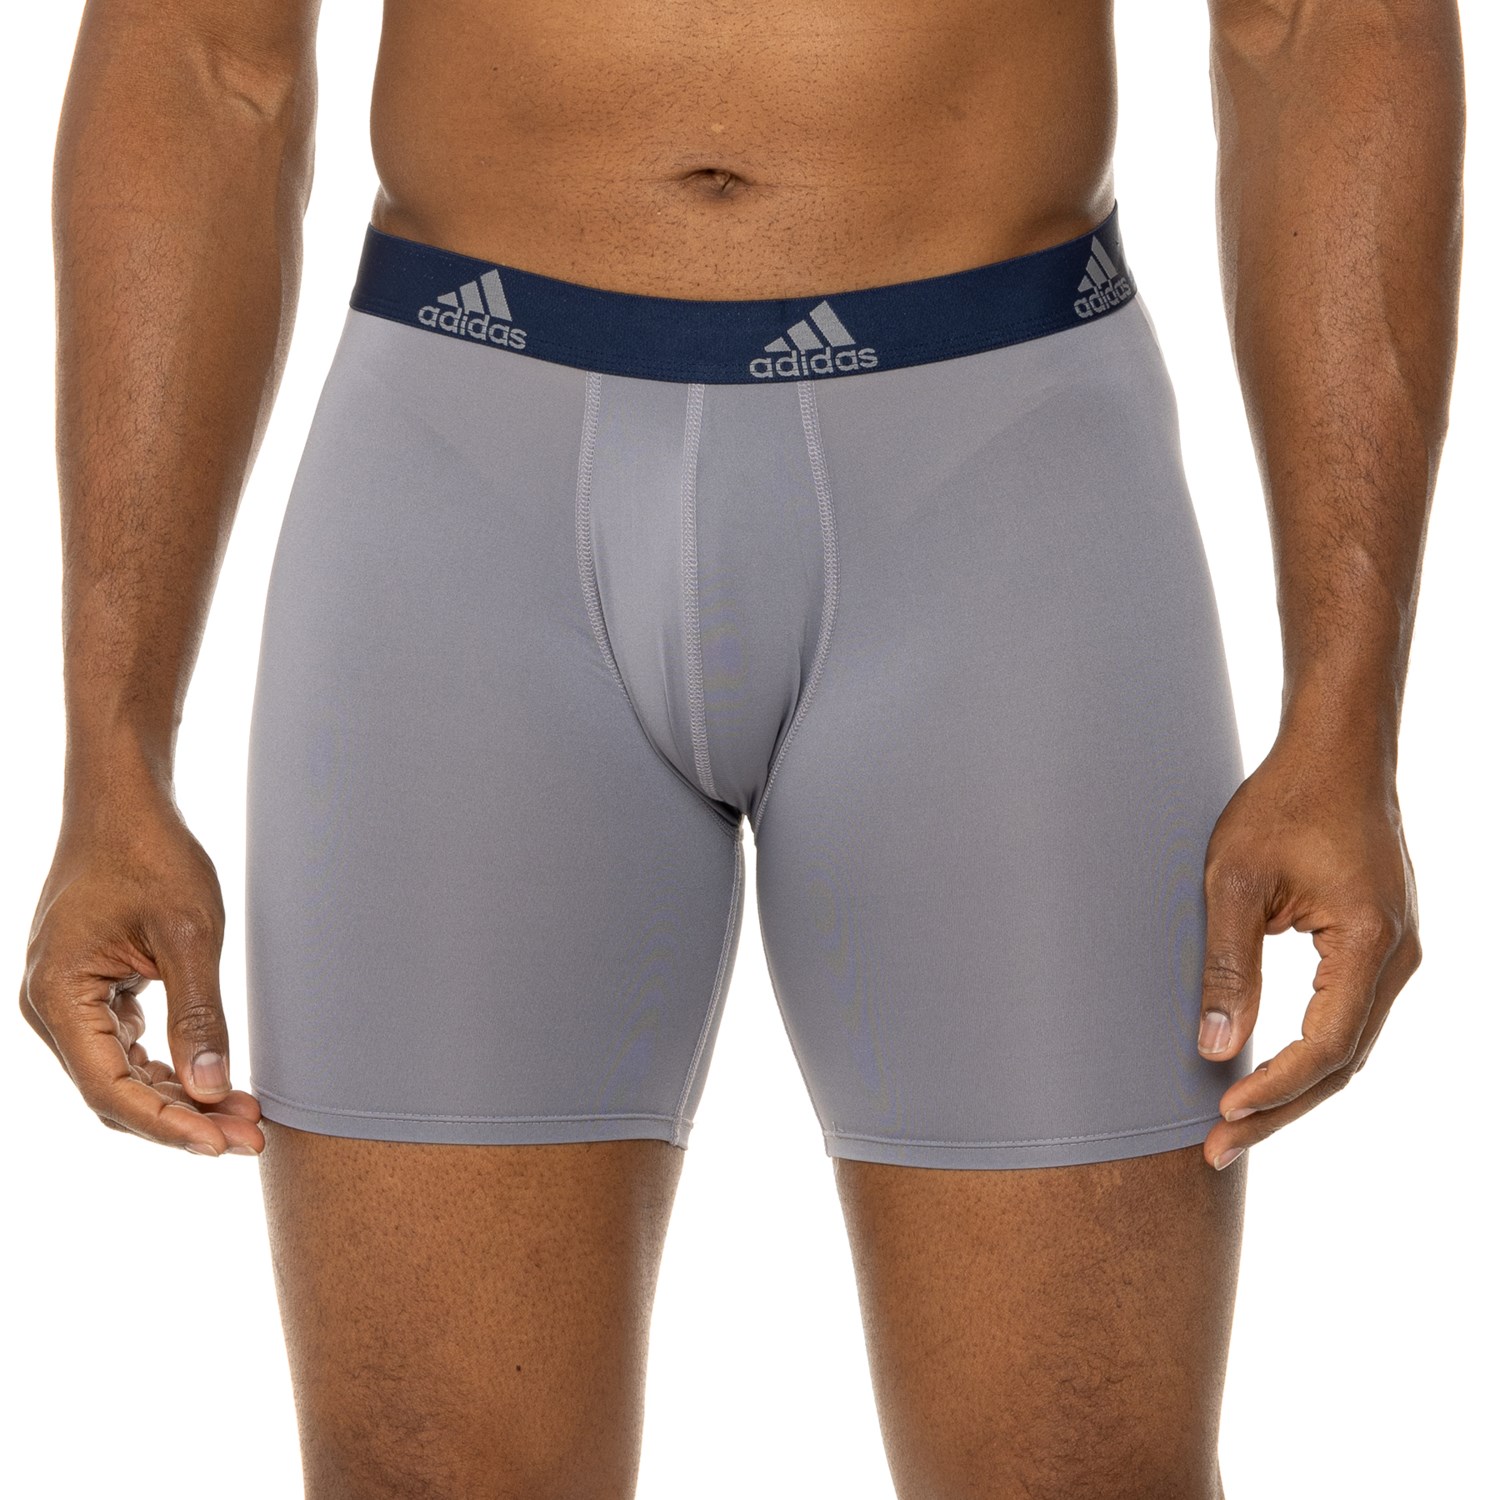 46% - - Briefs Sport-Performance 3-Pack Boxer adidas Save Core